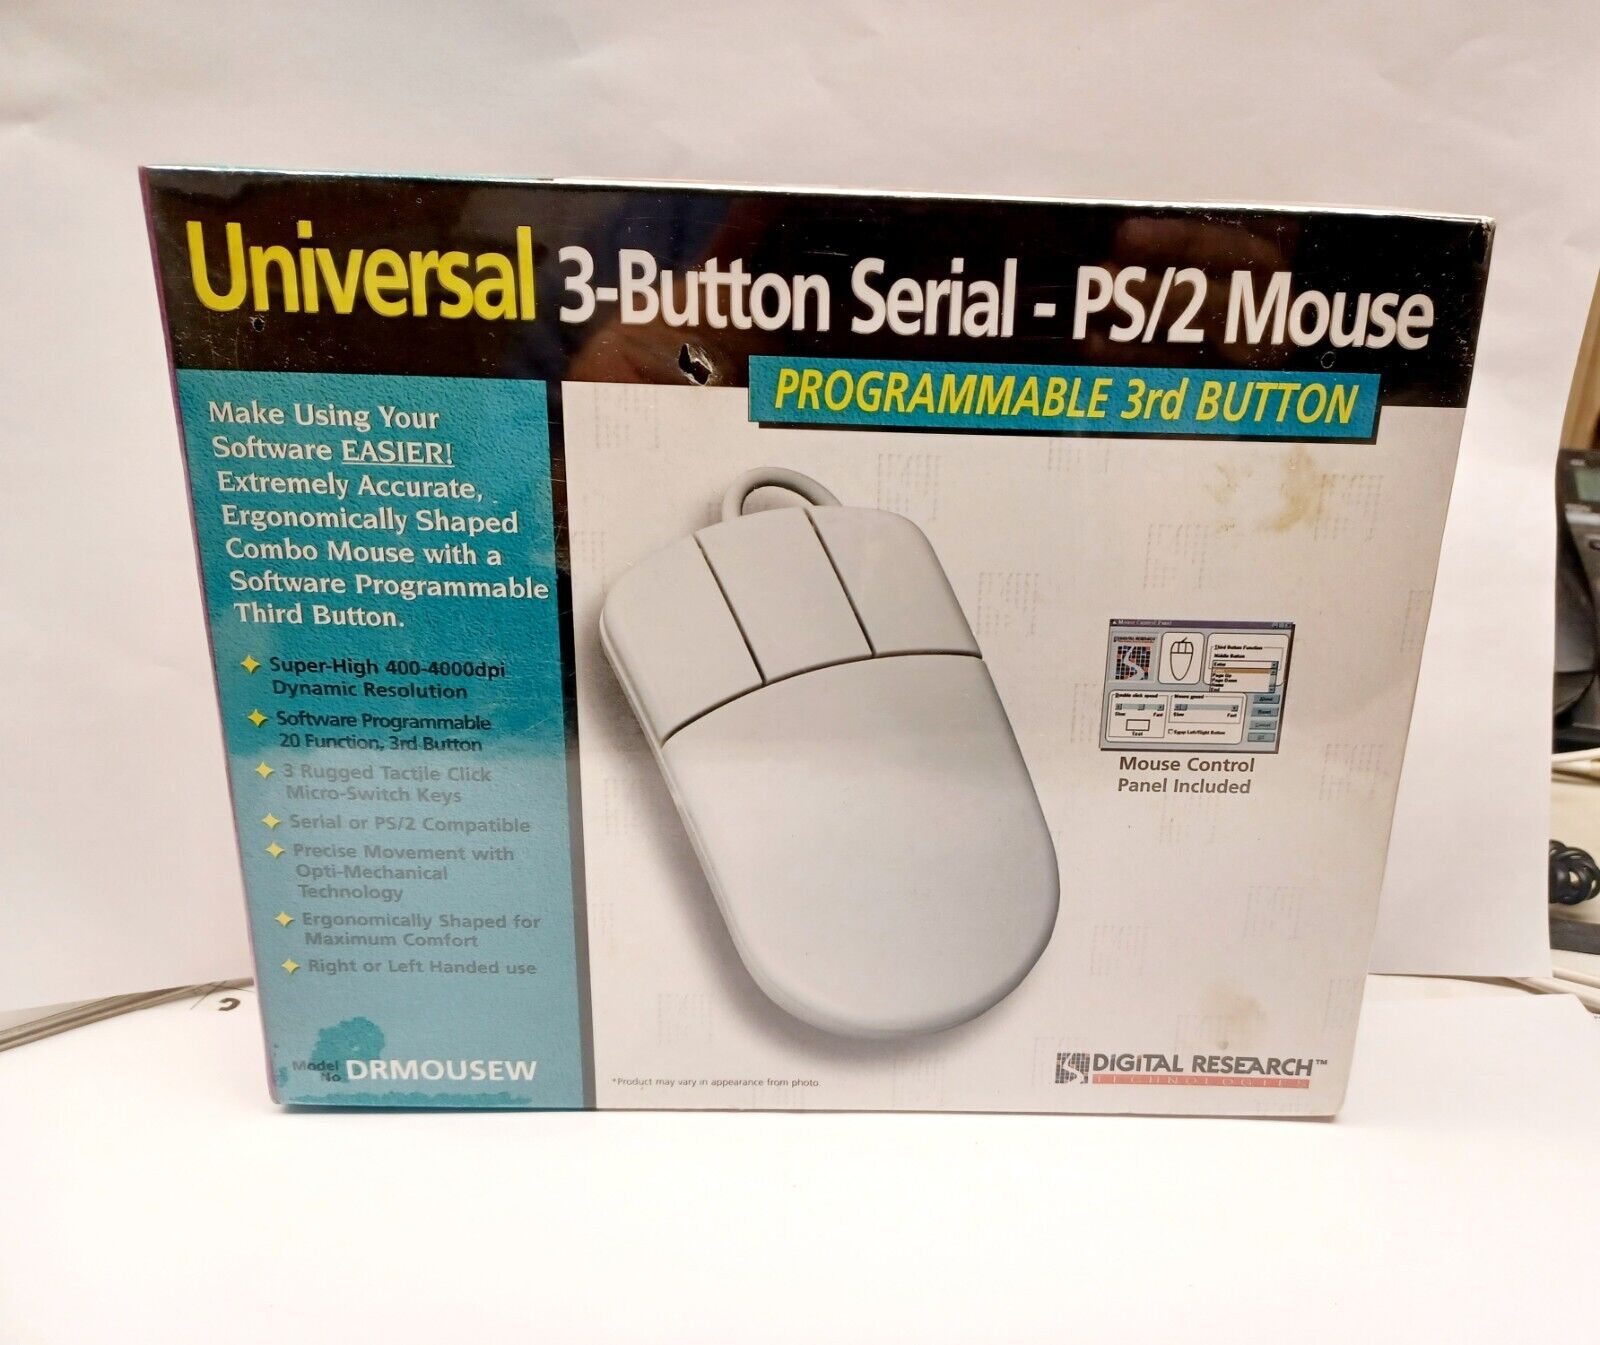 Vintage Digital Research Universal  3-Button Serial - PS/2 Mouse  